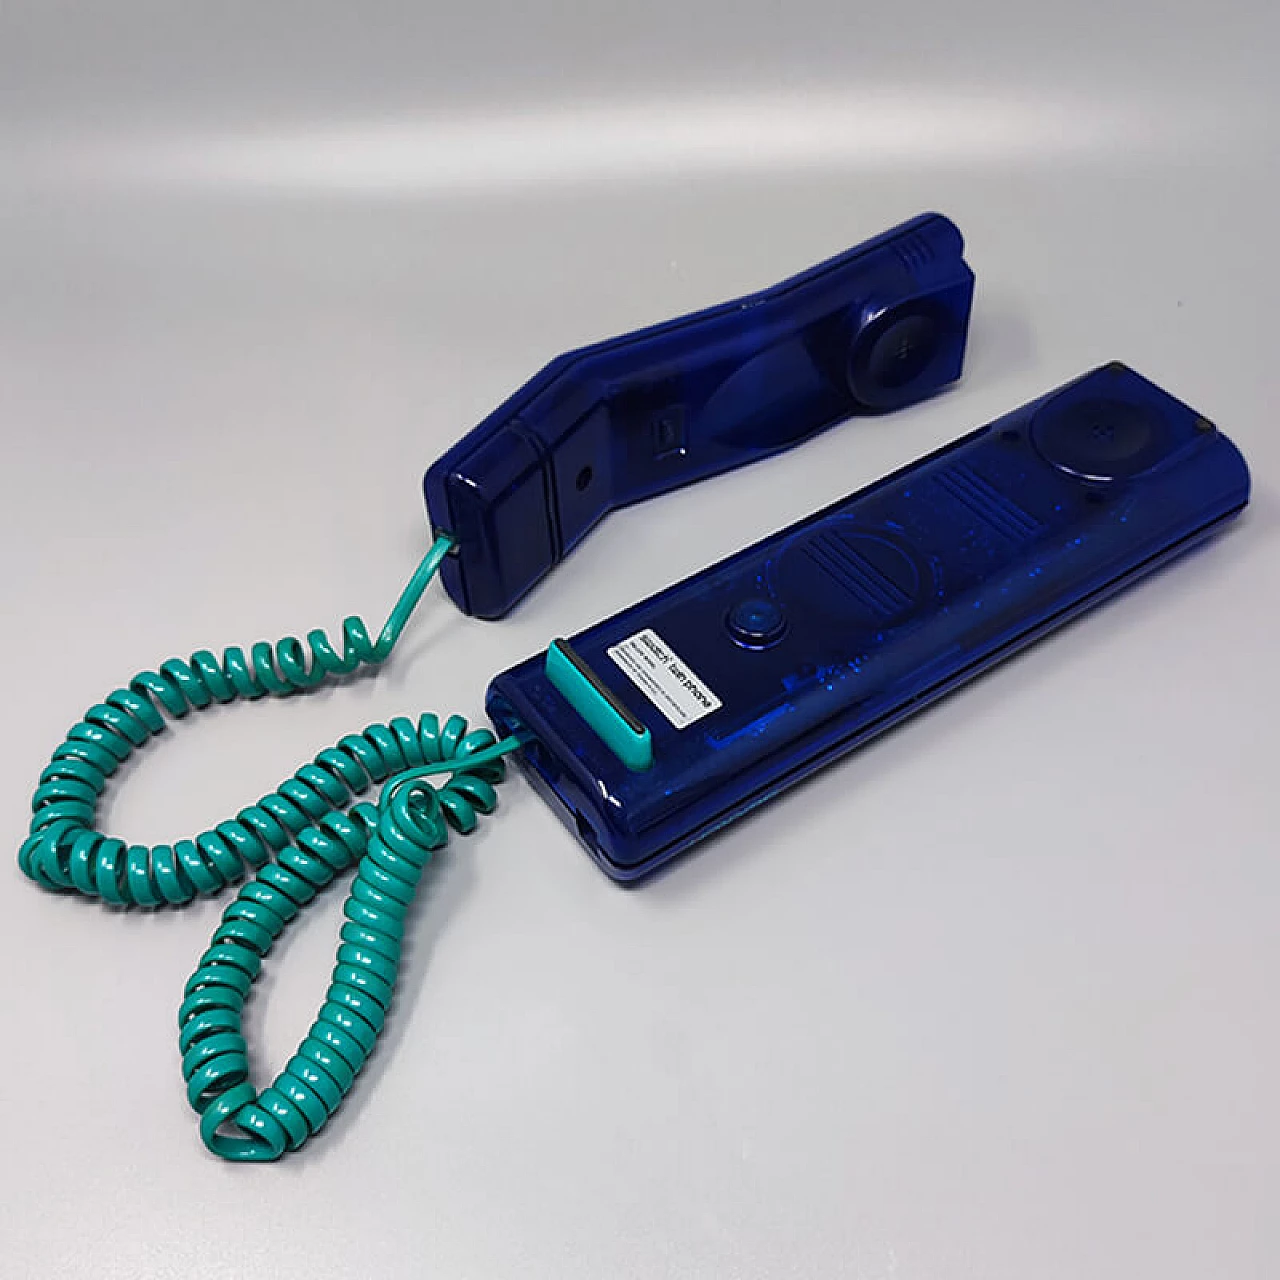 Swatch Twin Deluxe blue phone in Memphis-style, 1980s 8